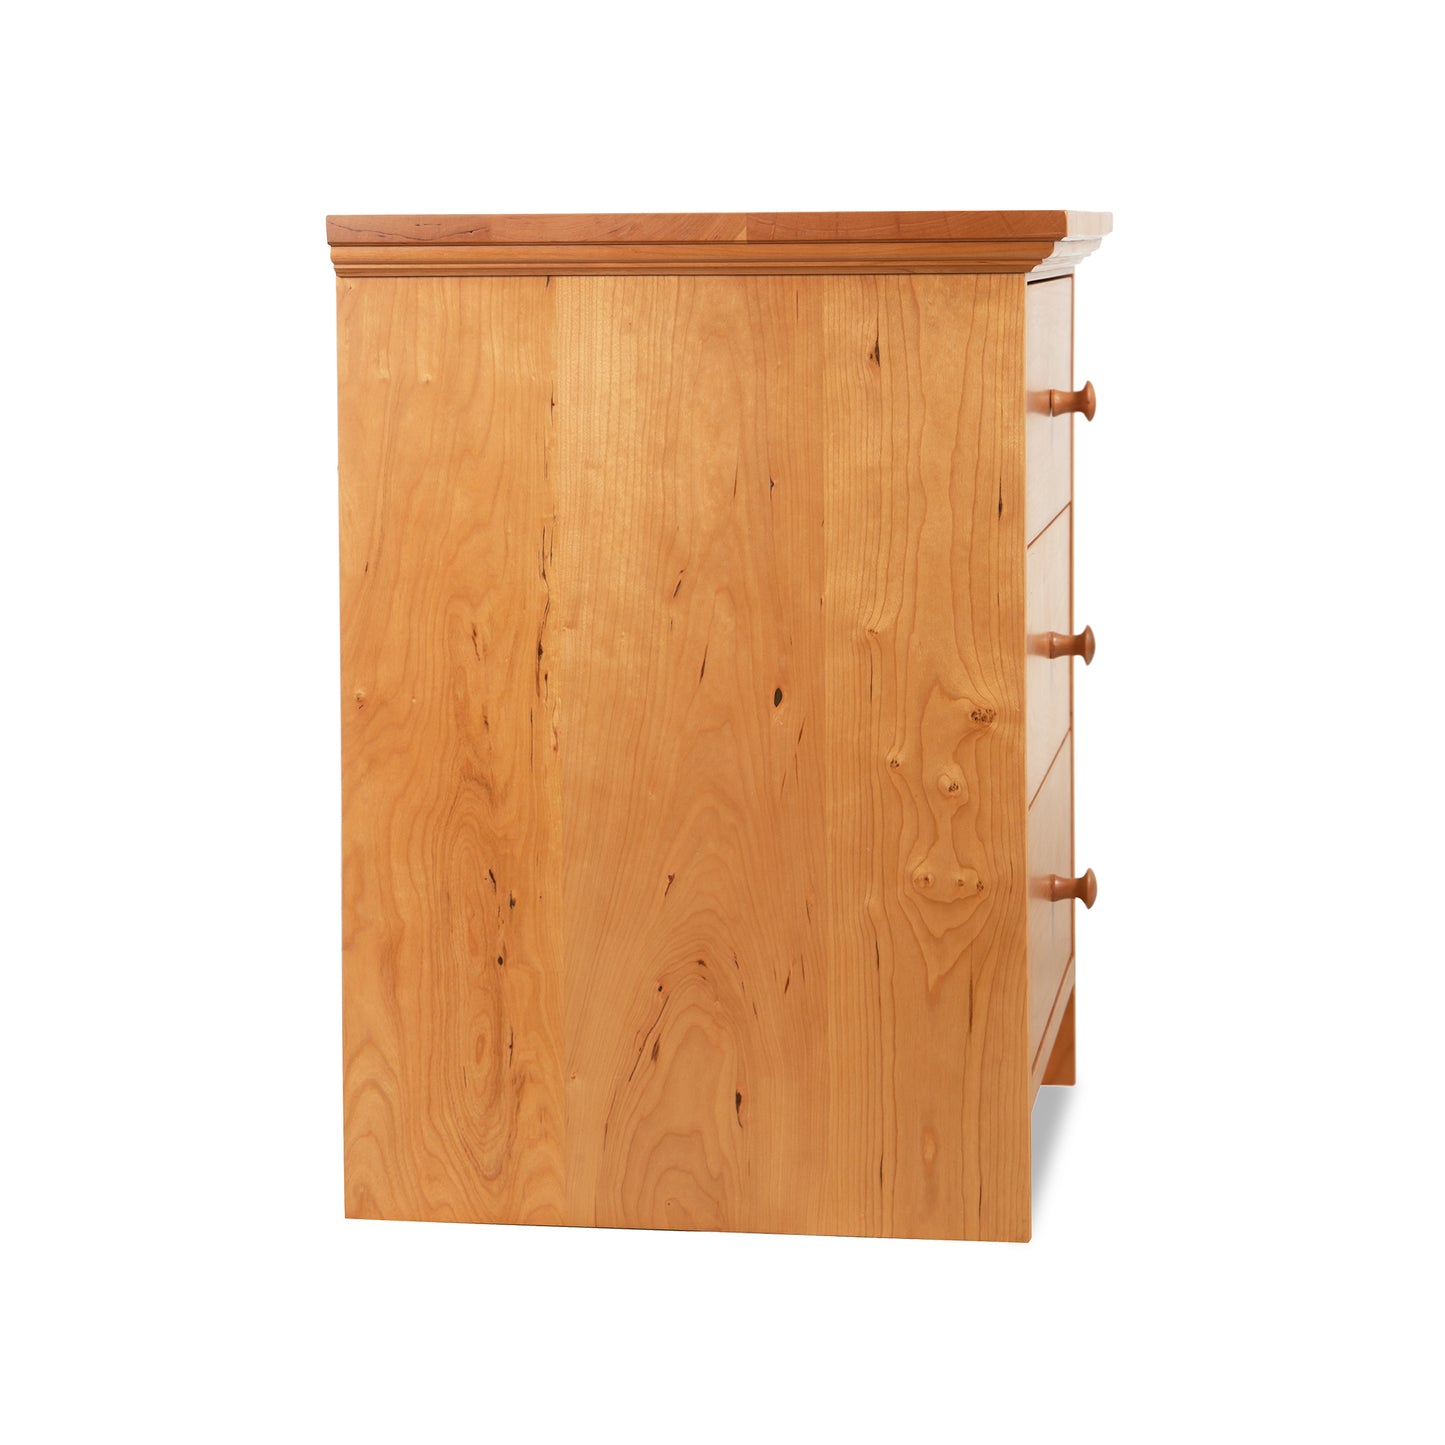 An elegant Lyndon Furniture New England Shaker 3-Drawer Nightstand with Arched Base on a white background.